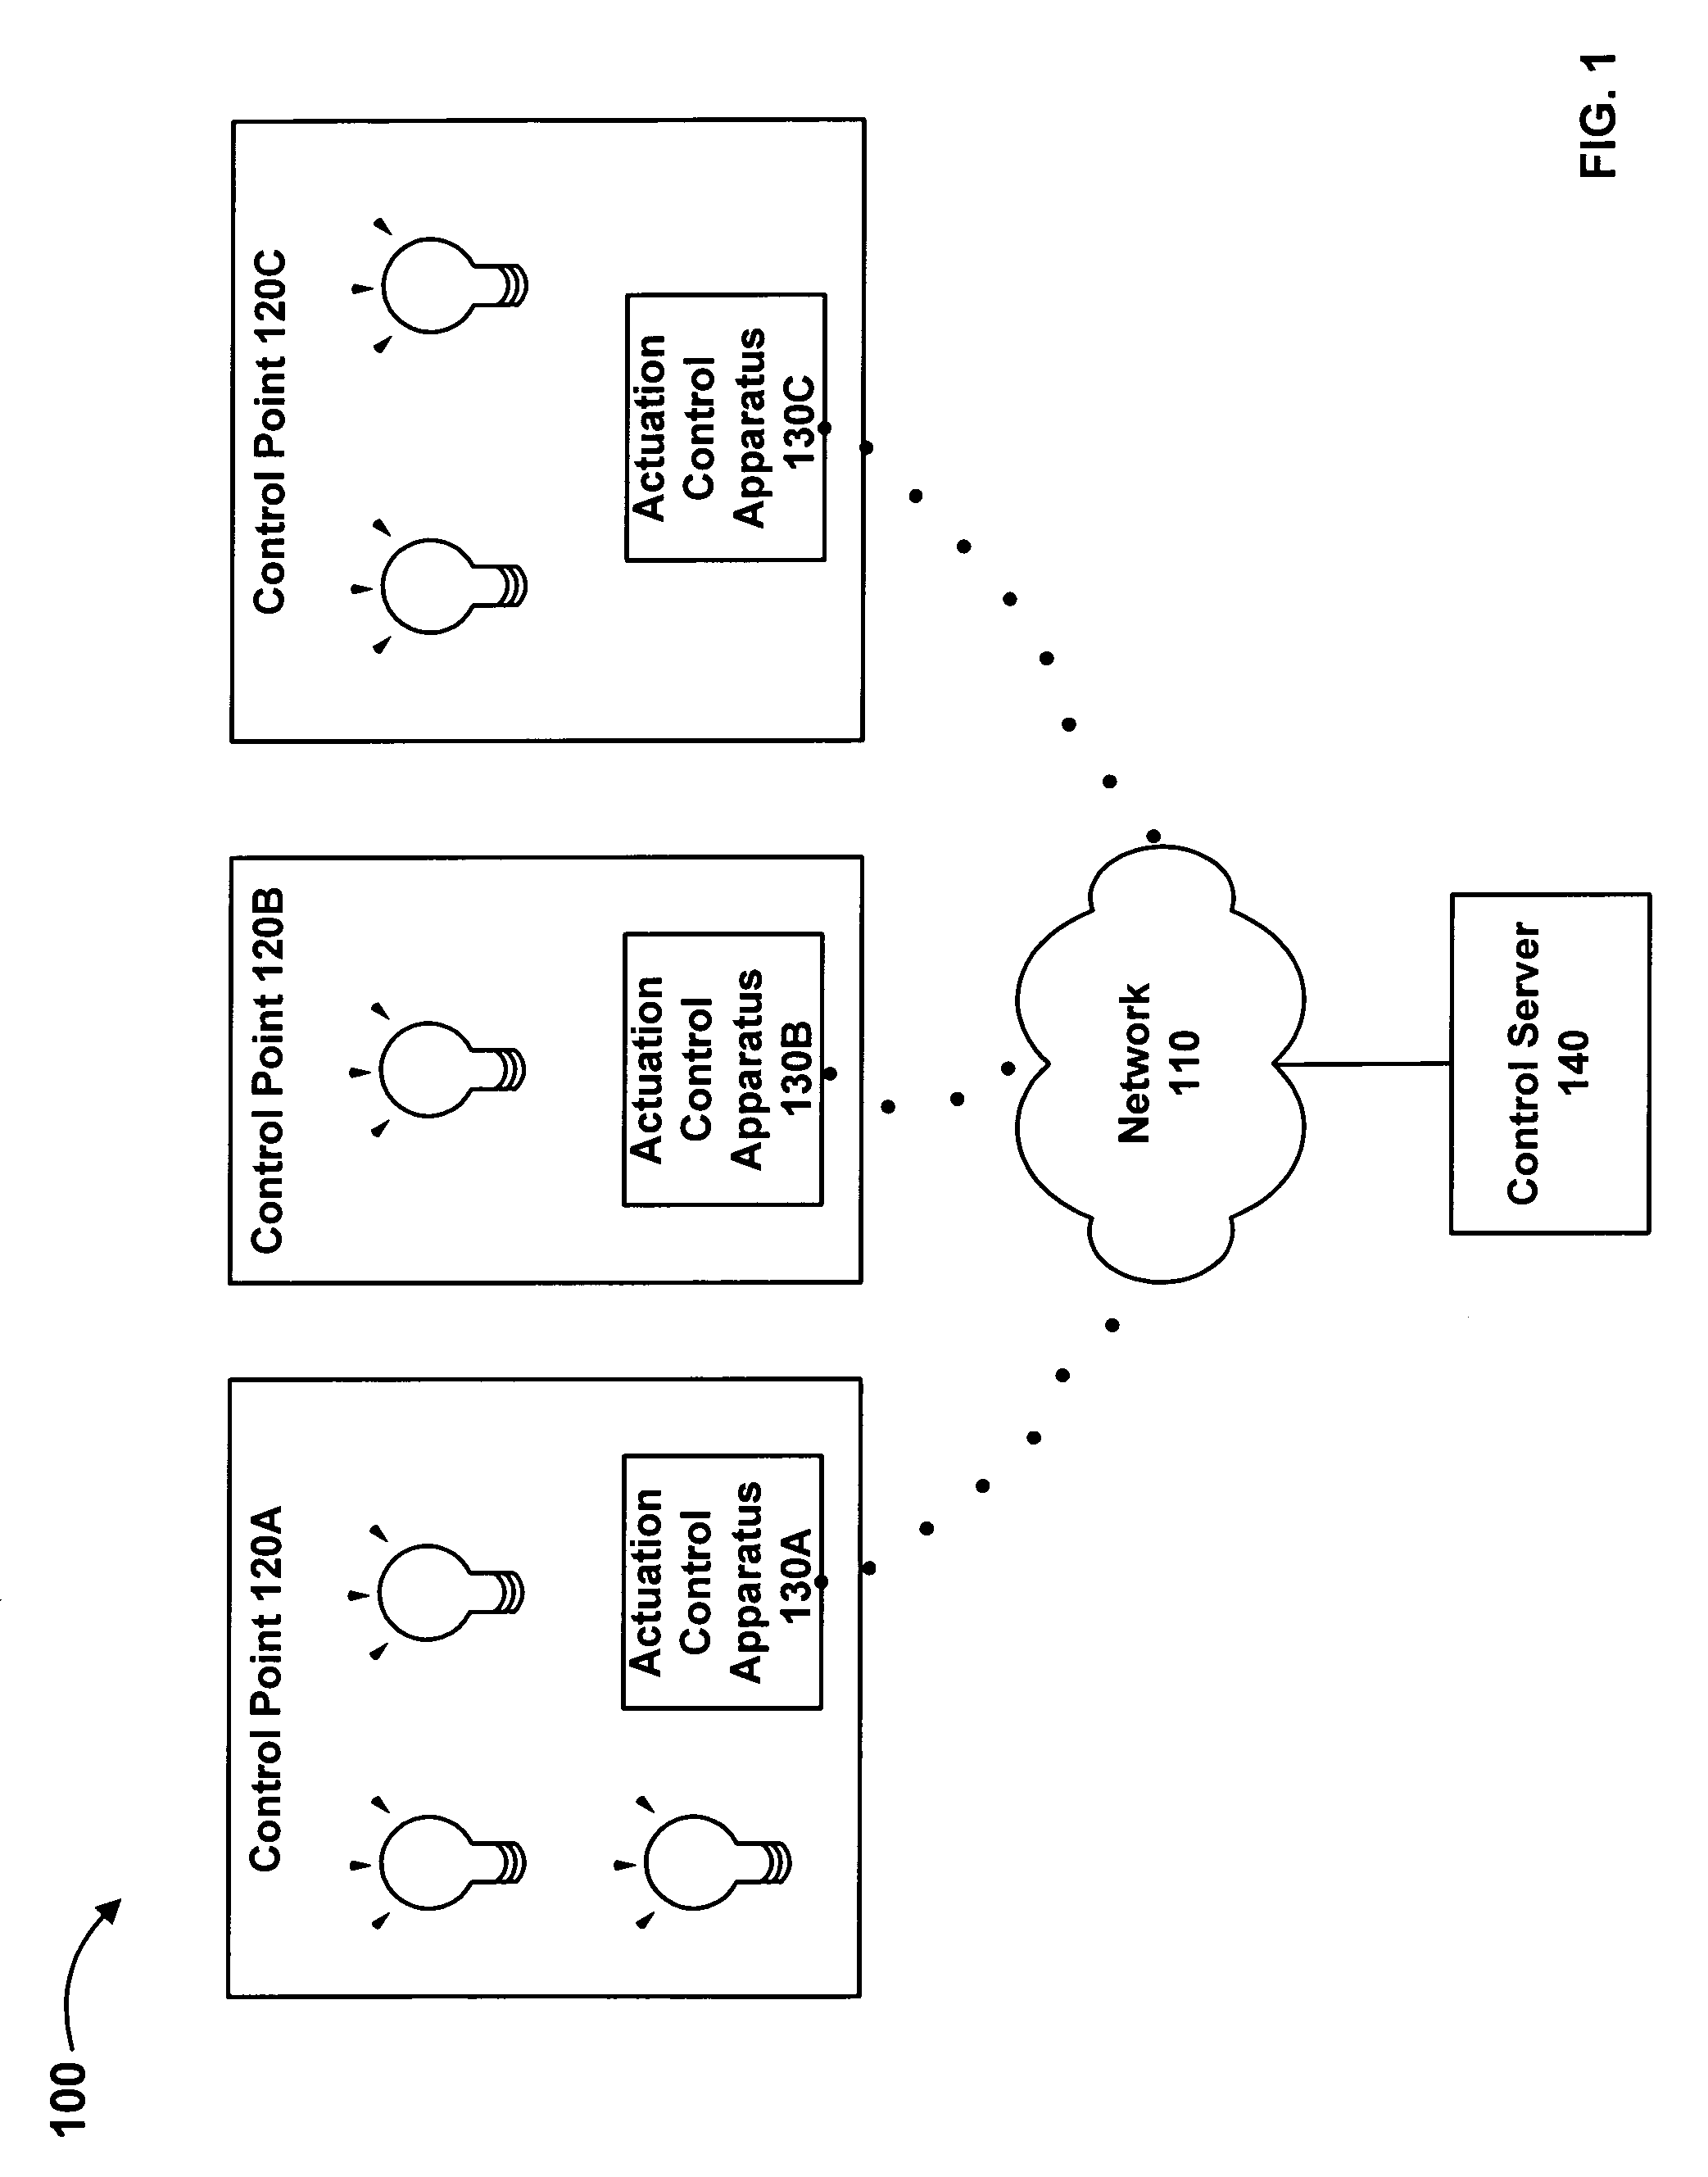 Intelligence in distributed lighting control devices